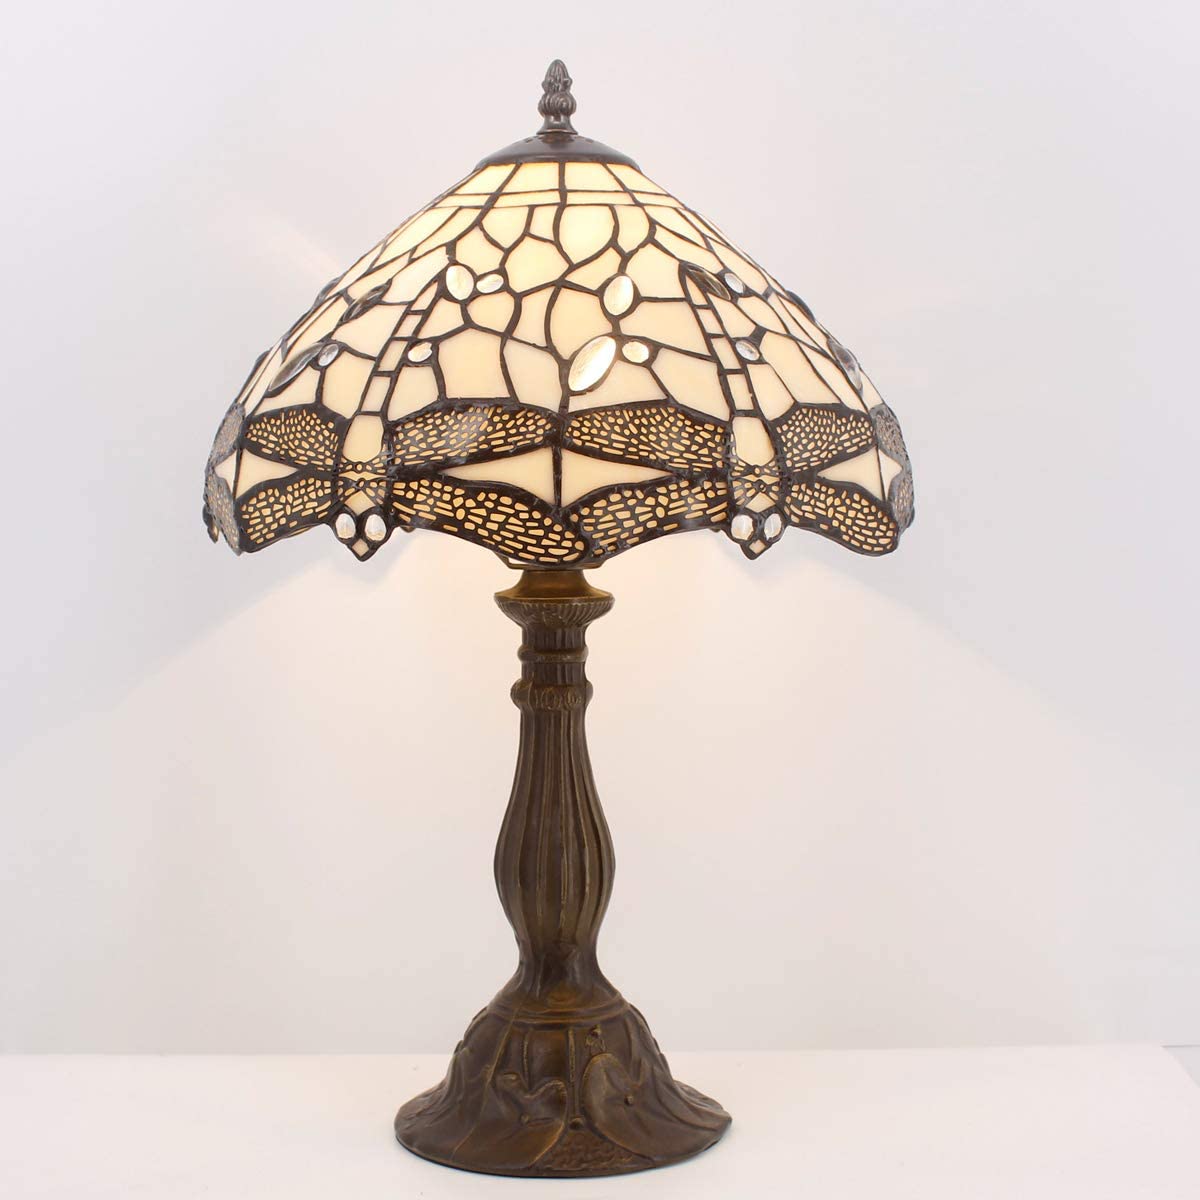 GEDUBIUBOO  Lamp Cream Stained Glass Dragonfly Bedside Table Lamp Desk Reading Light 12X12X18 Inches Decor Bedroom Living Room  Office S139 Series